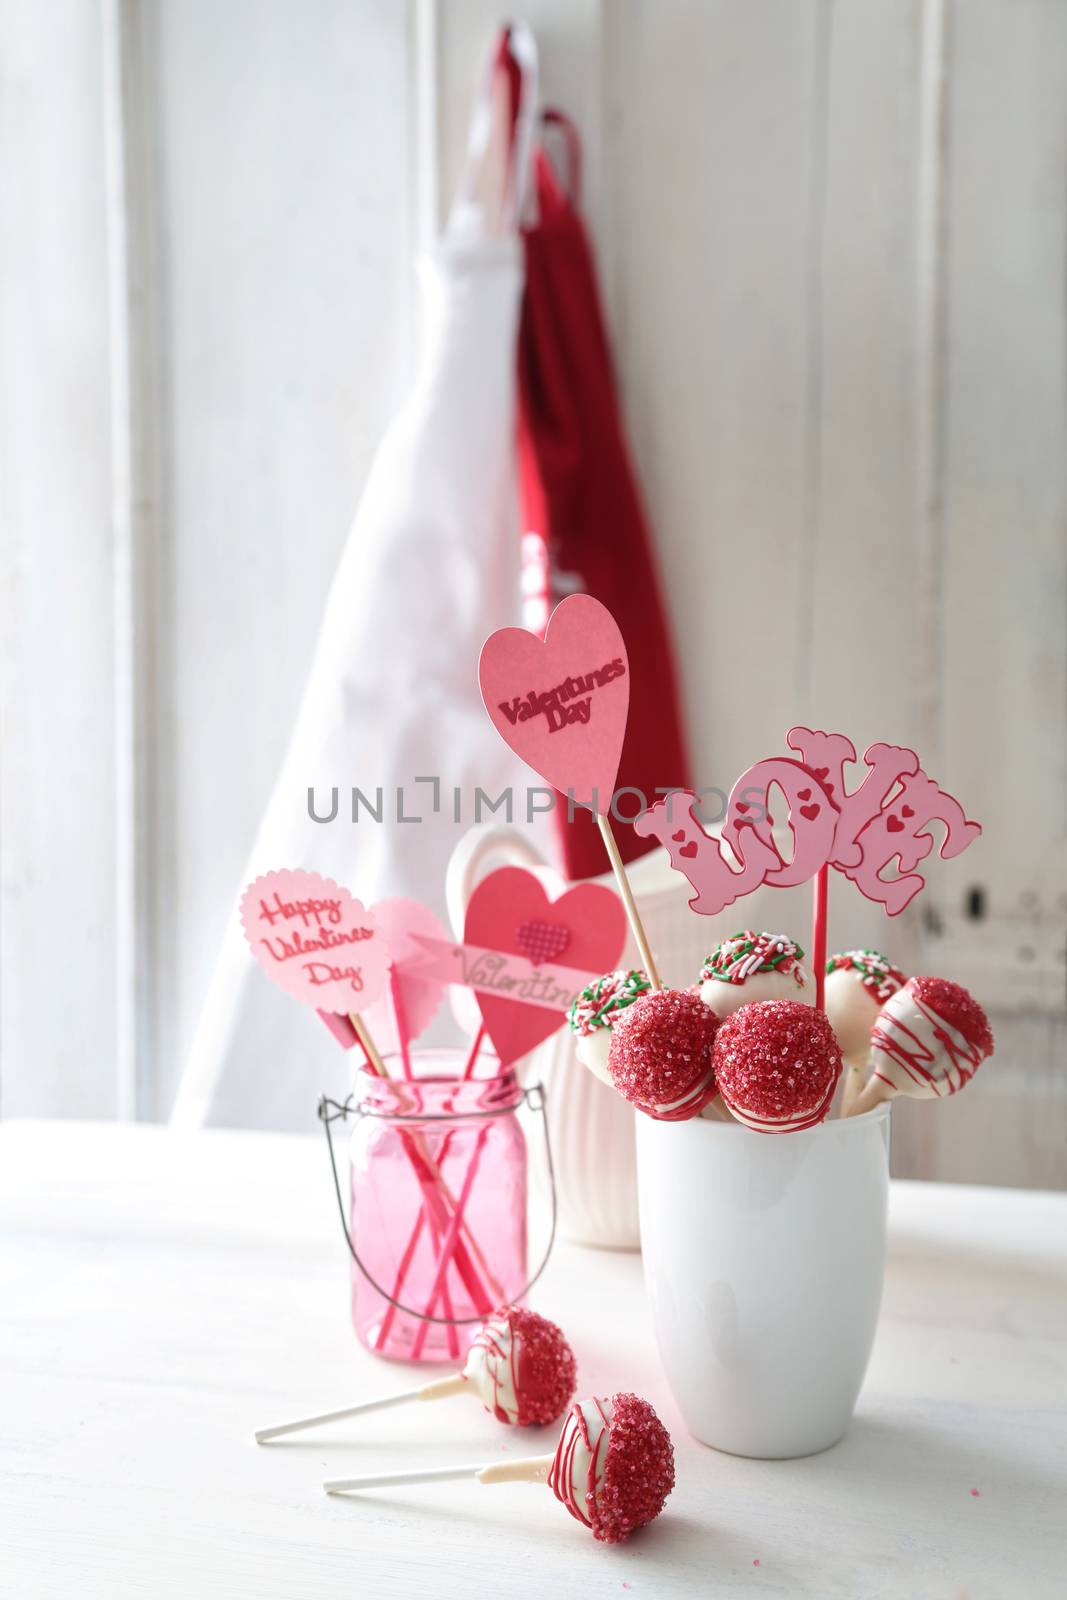 Red and white cake pops with decorations for Valentine's Day